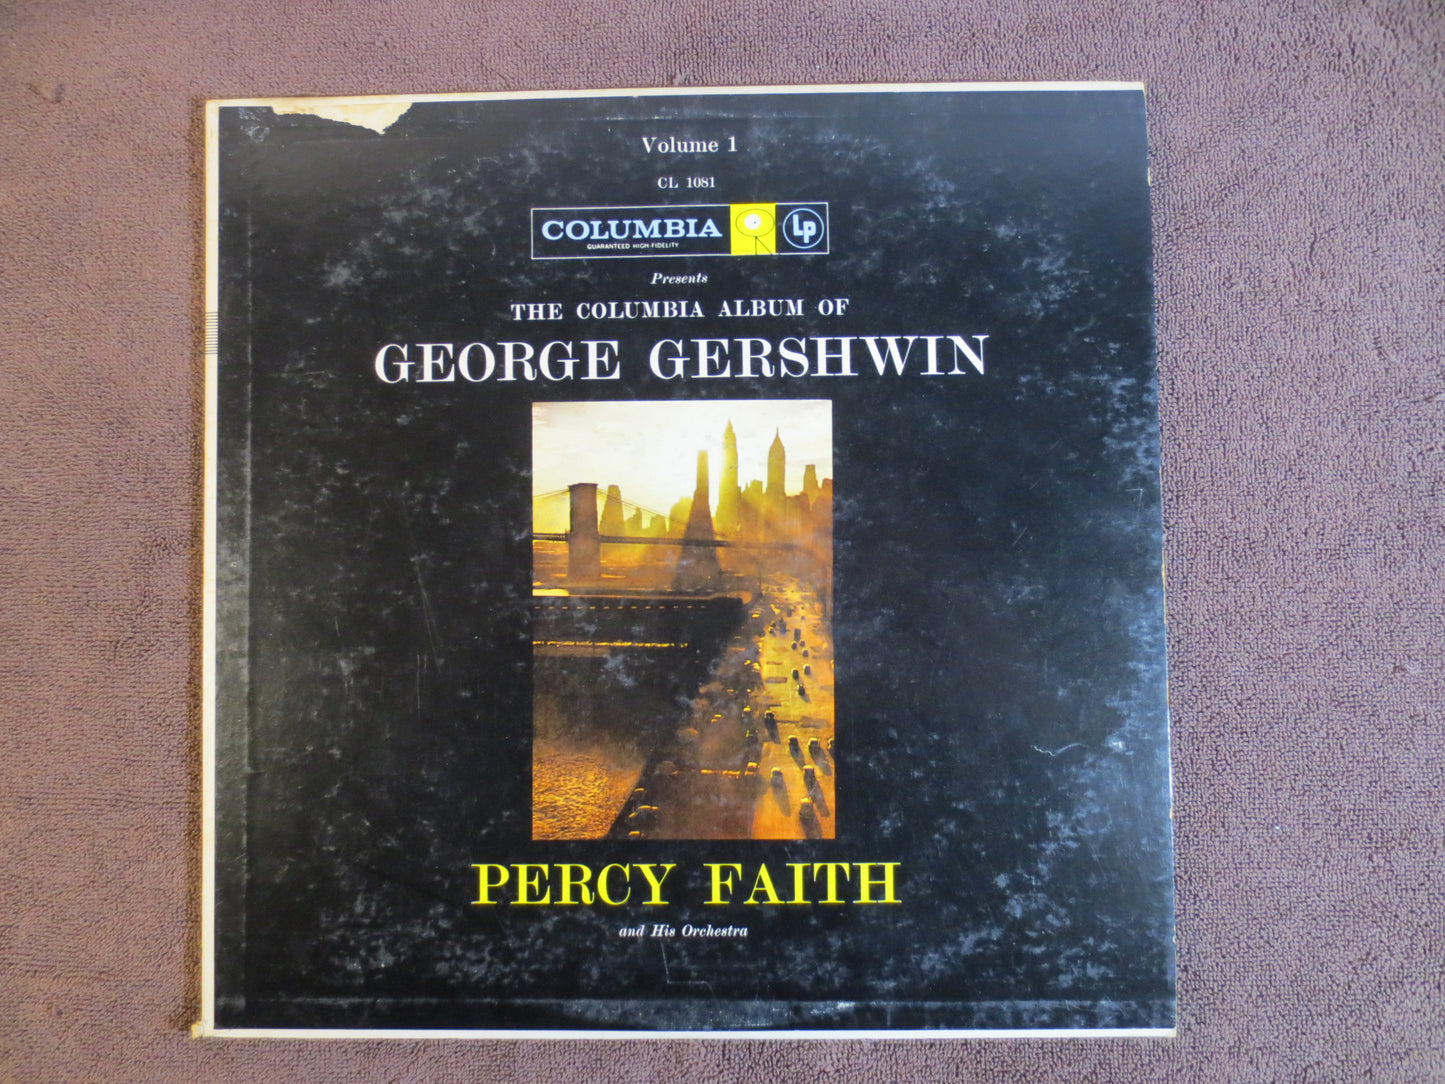 PERCY FAITH, George GERSHWIN Lp, Colmbia Records, Percy Faith Album, Percy Faith Vinyl, Vinyl Lp, Lps, 1958 Records